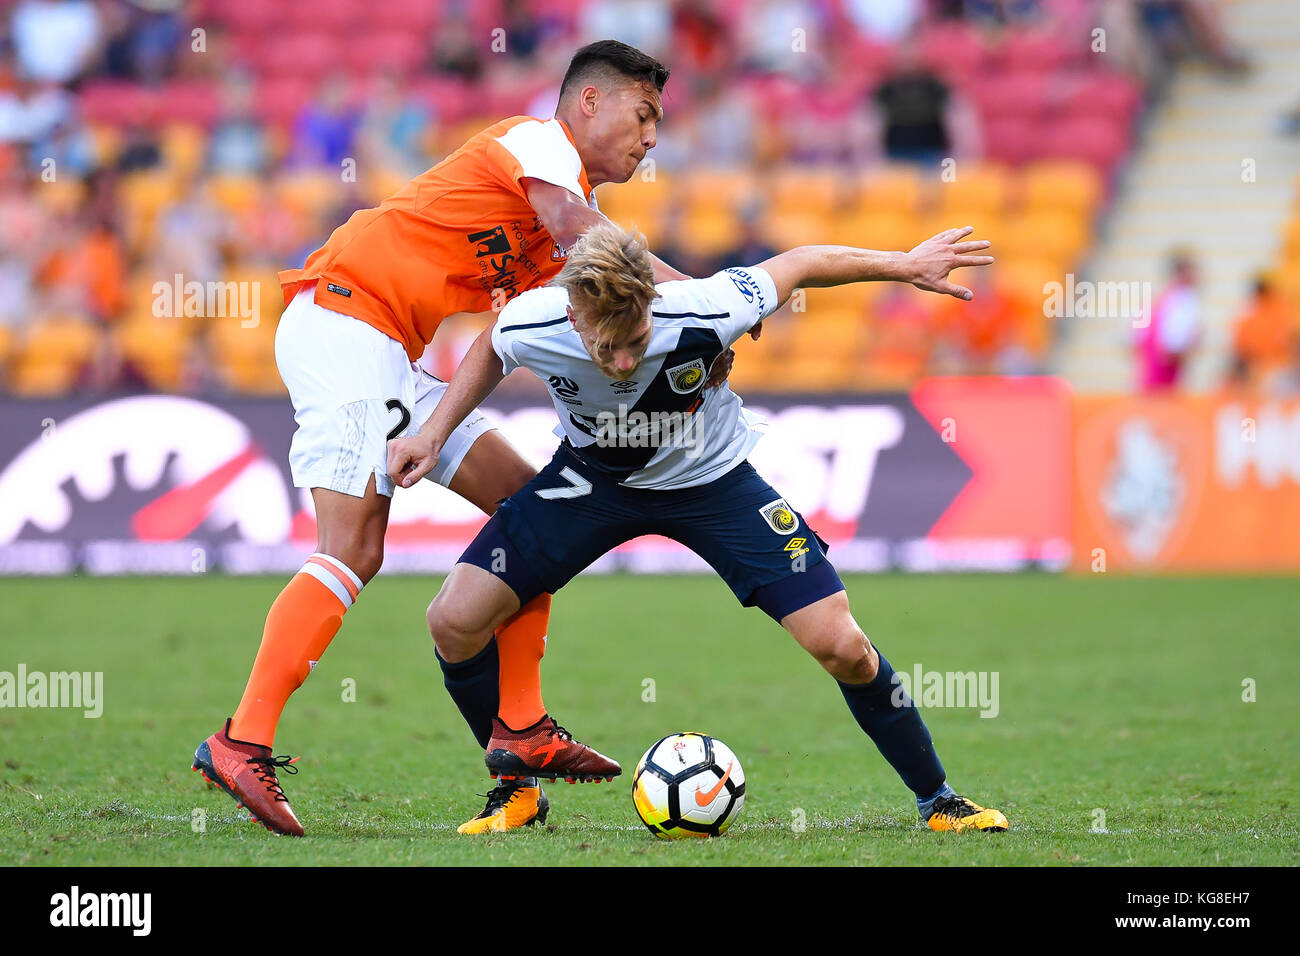 Brisbane, QUEENSLAND, AUSTRALIA. 5th Nov, 2017. Andrew Hoole of the Mariners (#7, right) and Dane Ingham of the Roar (#2) compete for the ball during the round five Hyundai A-League match between the Brisbane Roar and the Central Coast Mariners at Suncorp Stadium on November 5, 2017 in Brisbane, Australia. Credit: Albert Perez/ZUMA Wire/Alamy Live News Stock Photo